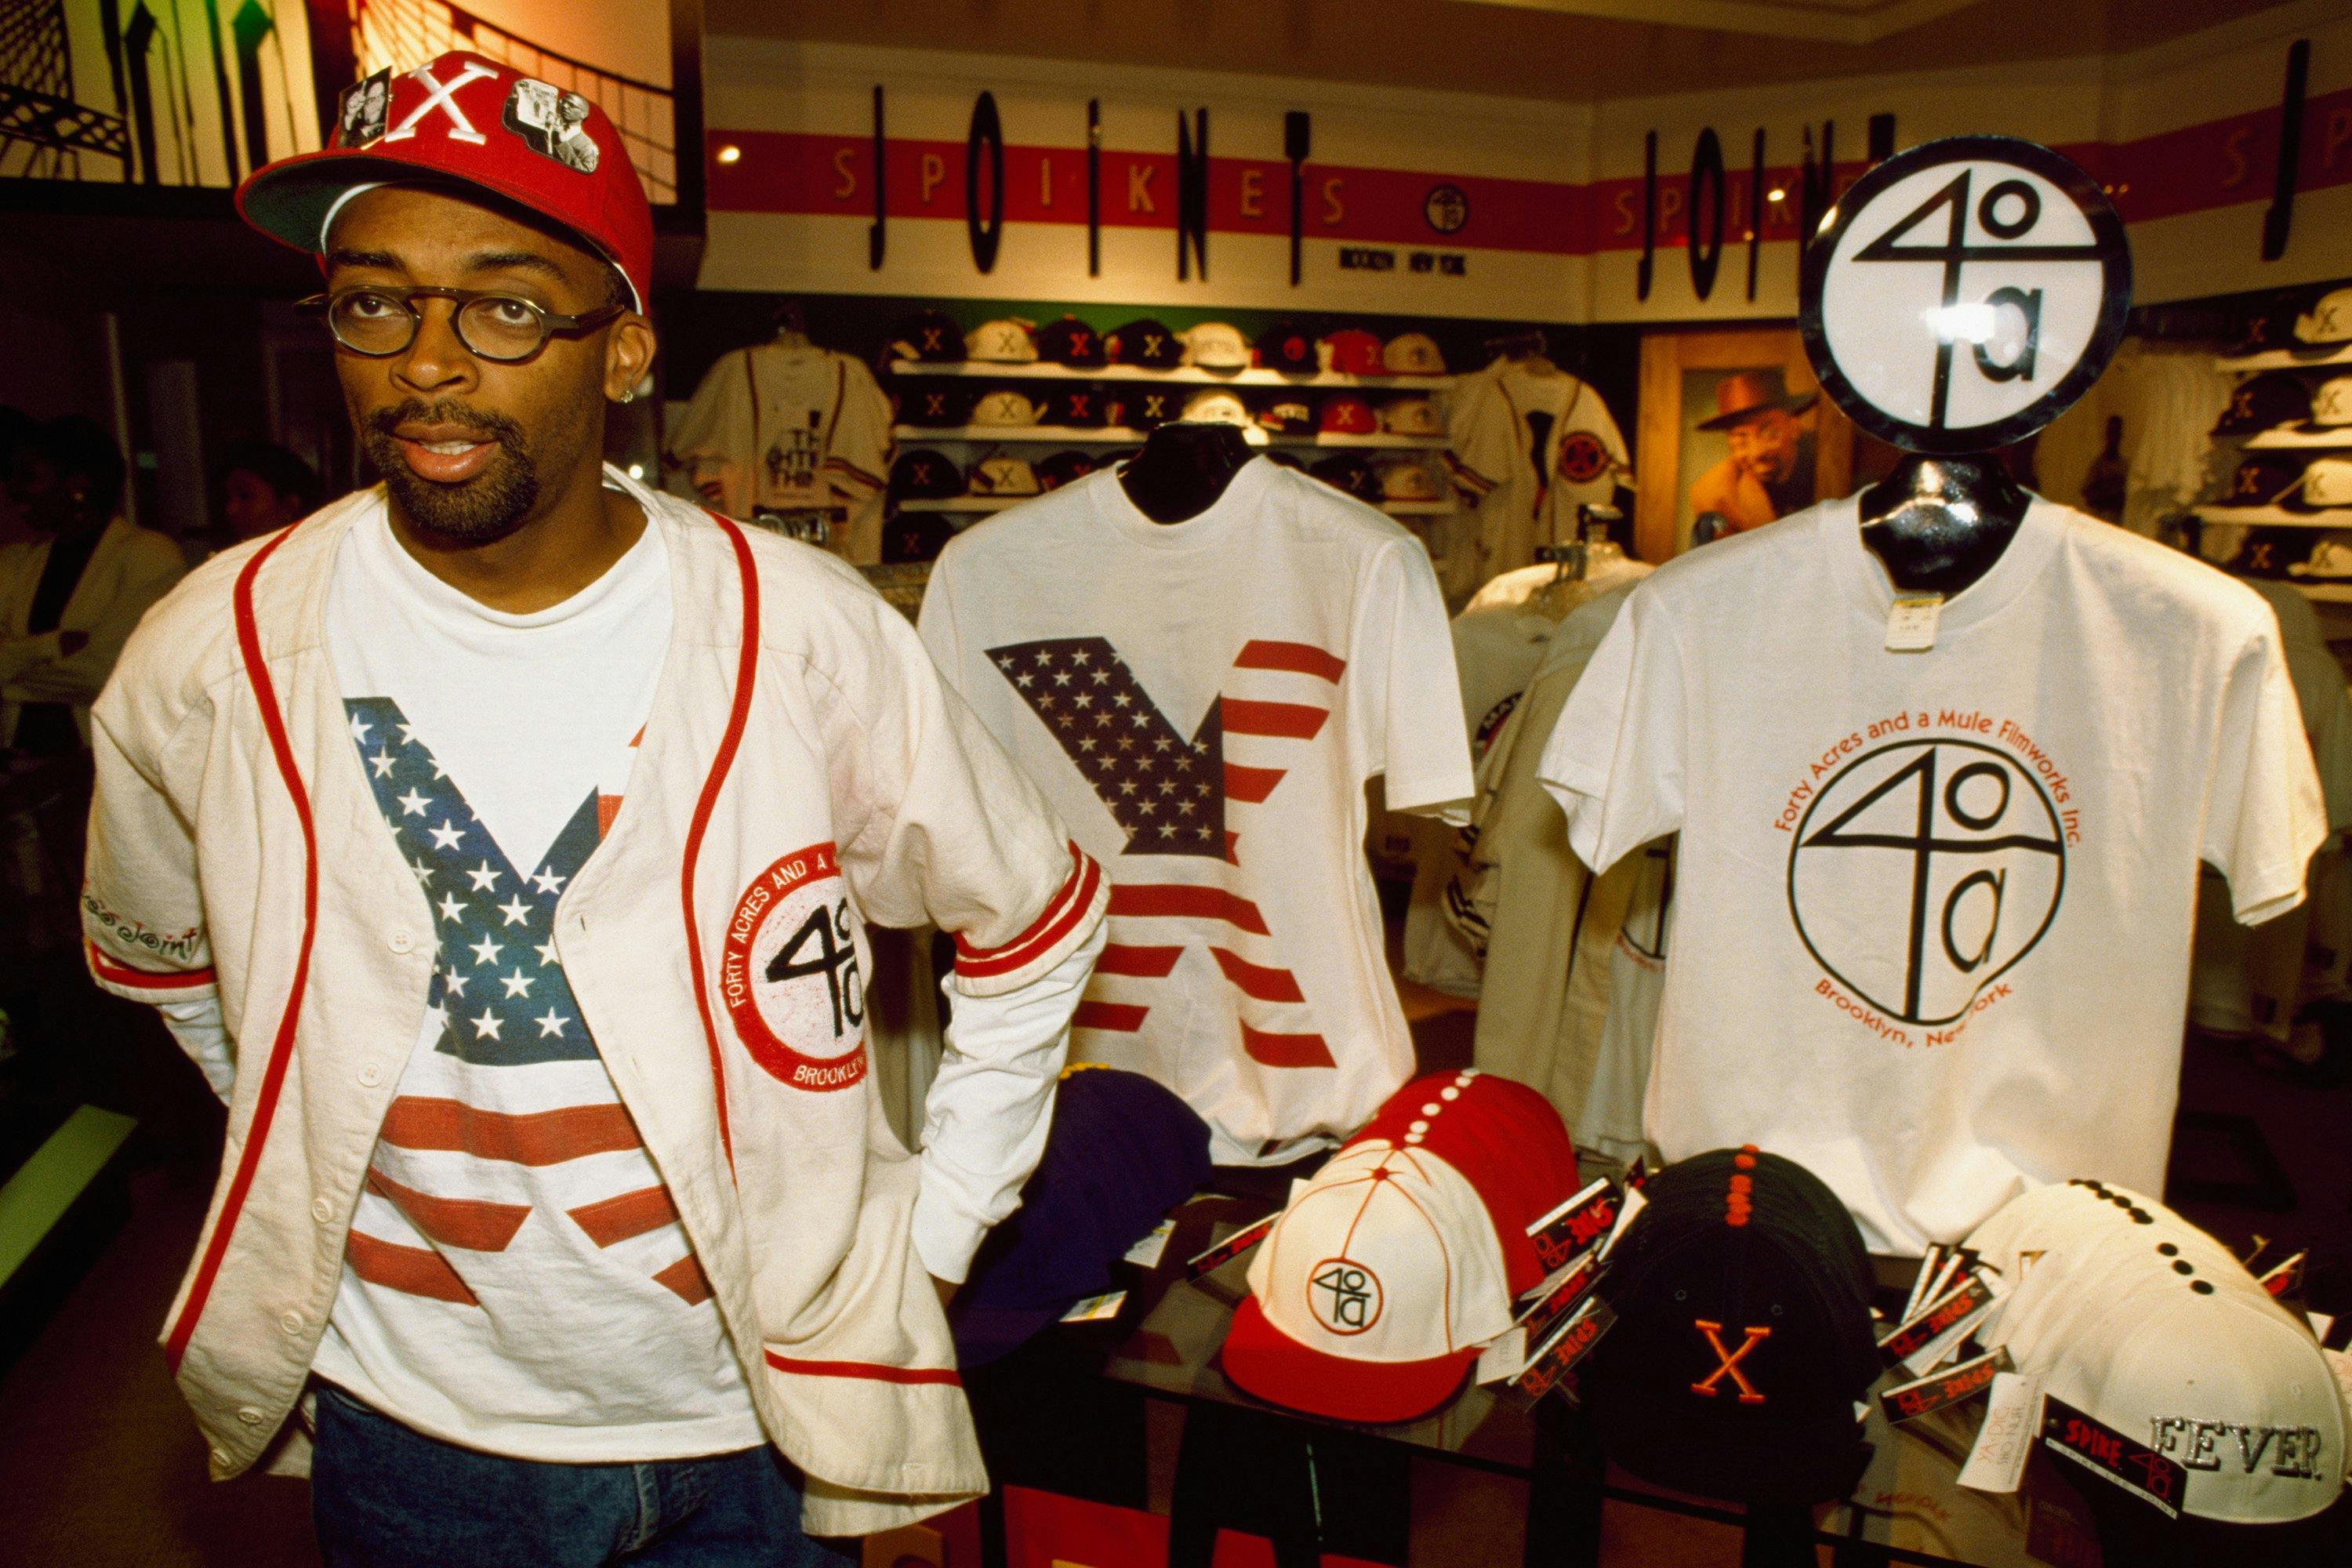 Spike Lee wears some of his clothing line, 40 Acres and Mule